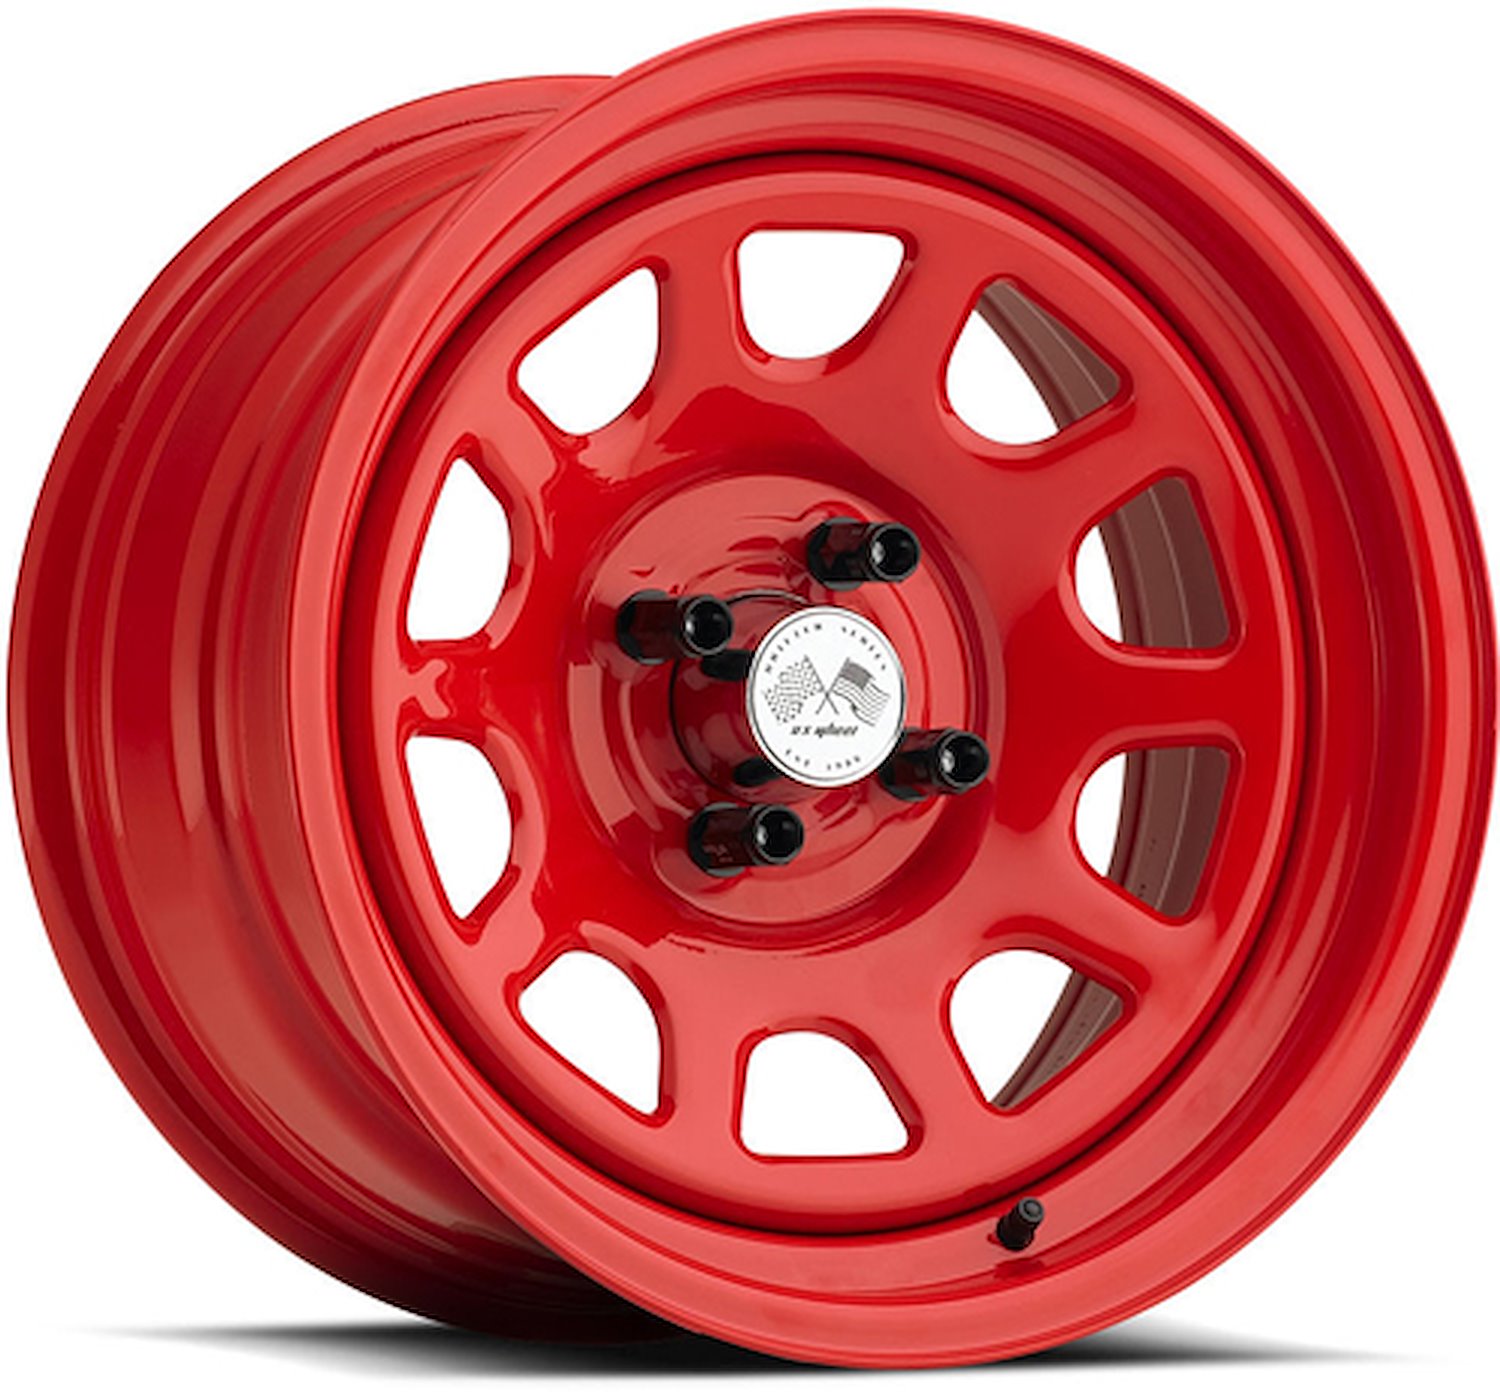 PAINTED DAYTONA FWD DRIFTER RED 15 x 8 4 x 100 Bolt Circle 5125 Back Spacing +16 offset 266 Center Bore 1400 lbs Load Rating